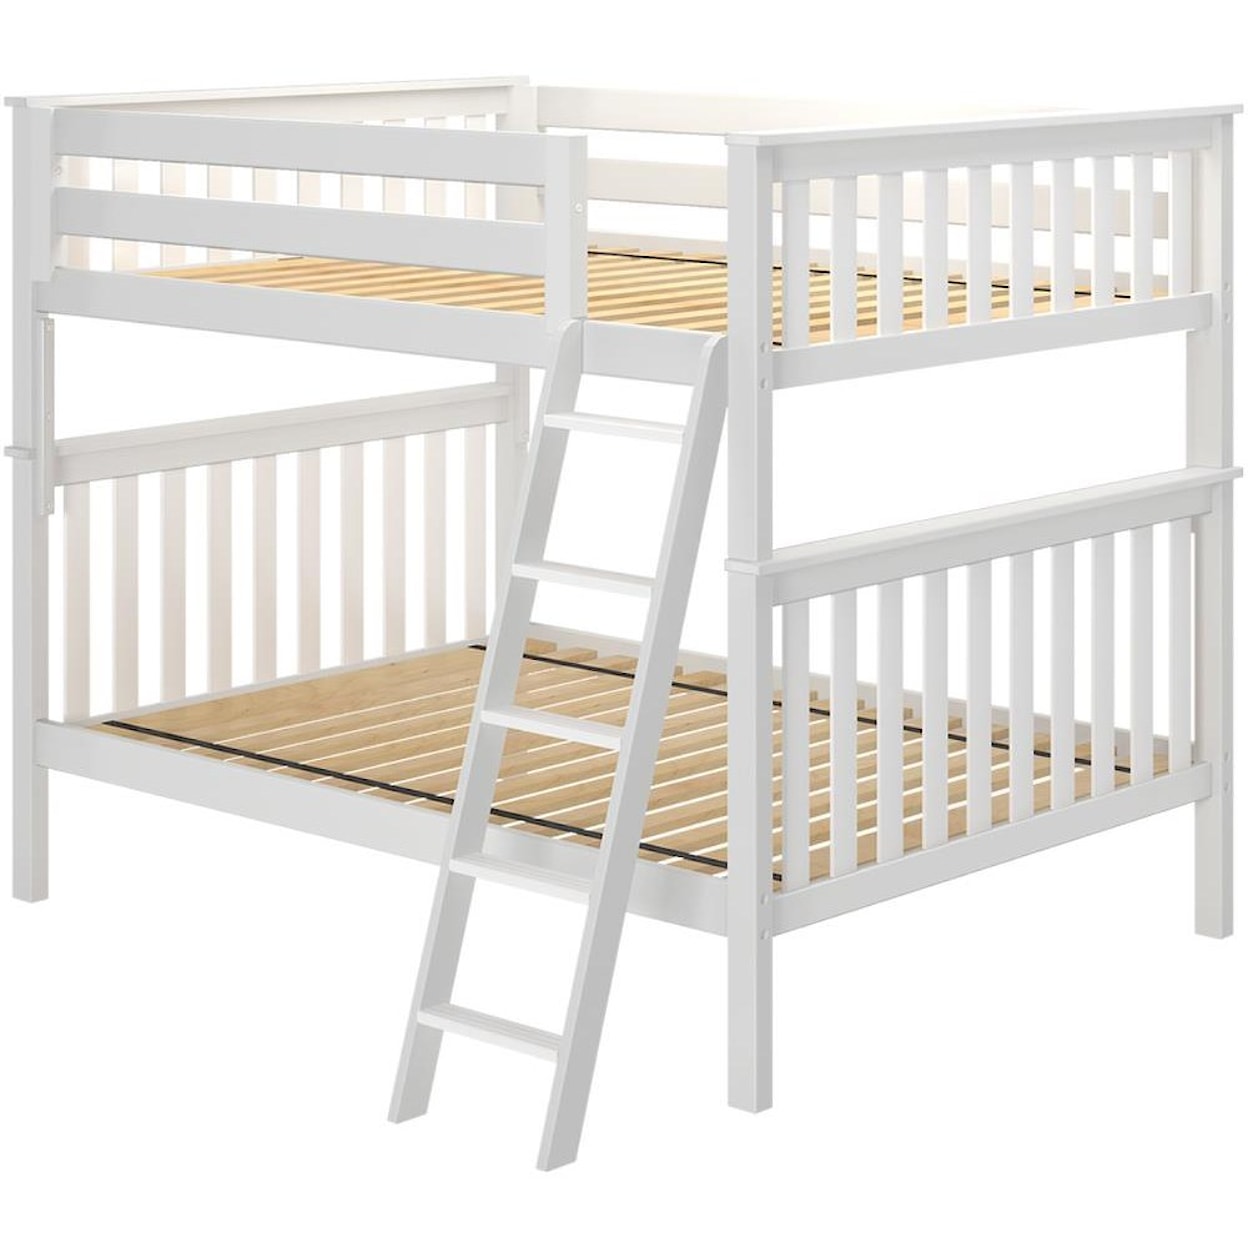 Jackpot Kids Bunk Beds Cambridge 1 Full/Full Bunk Bed in White